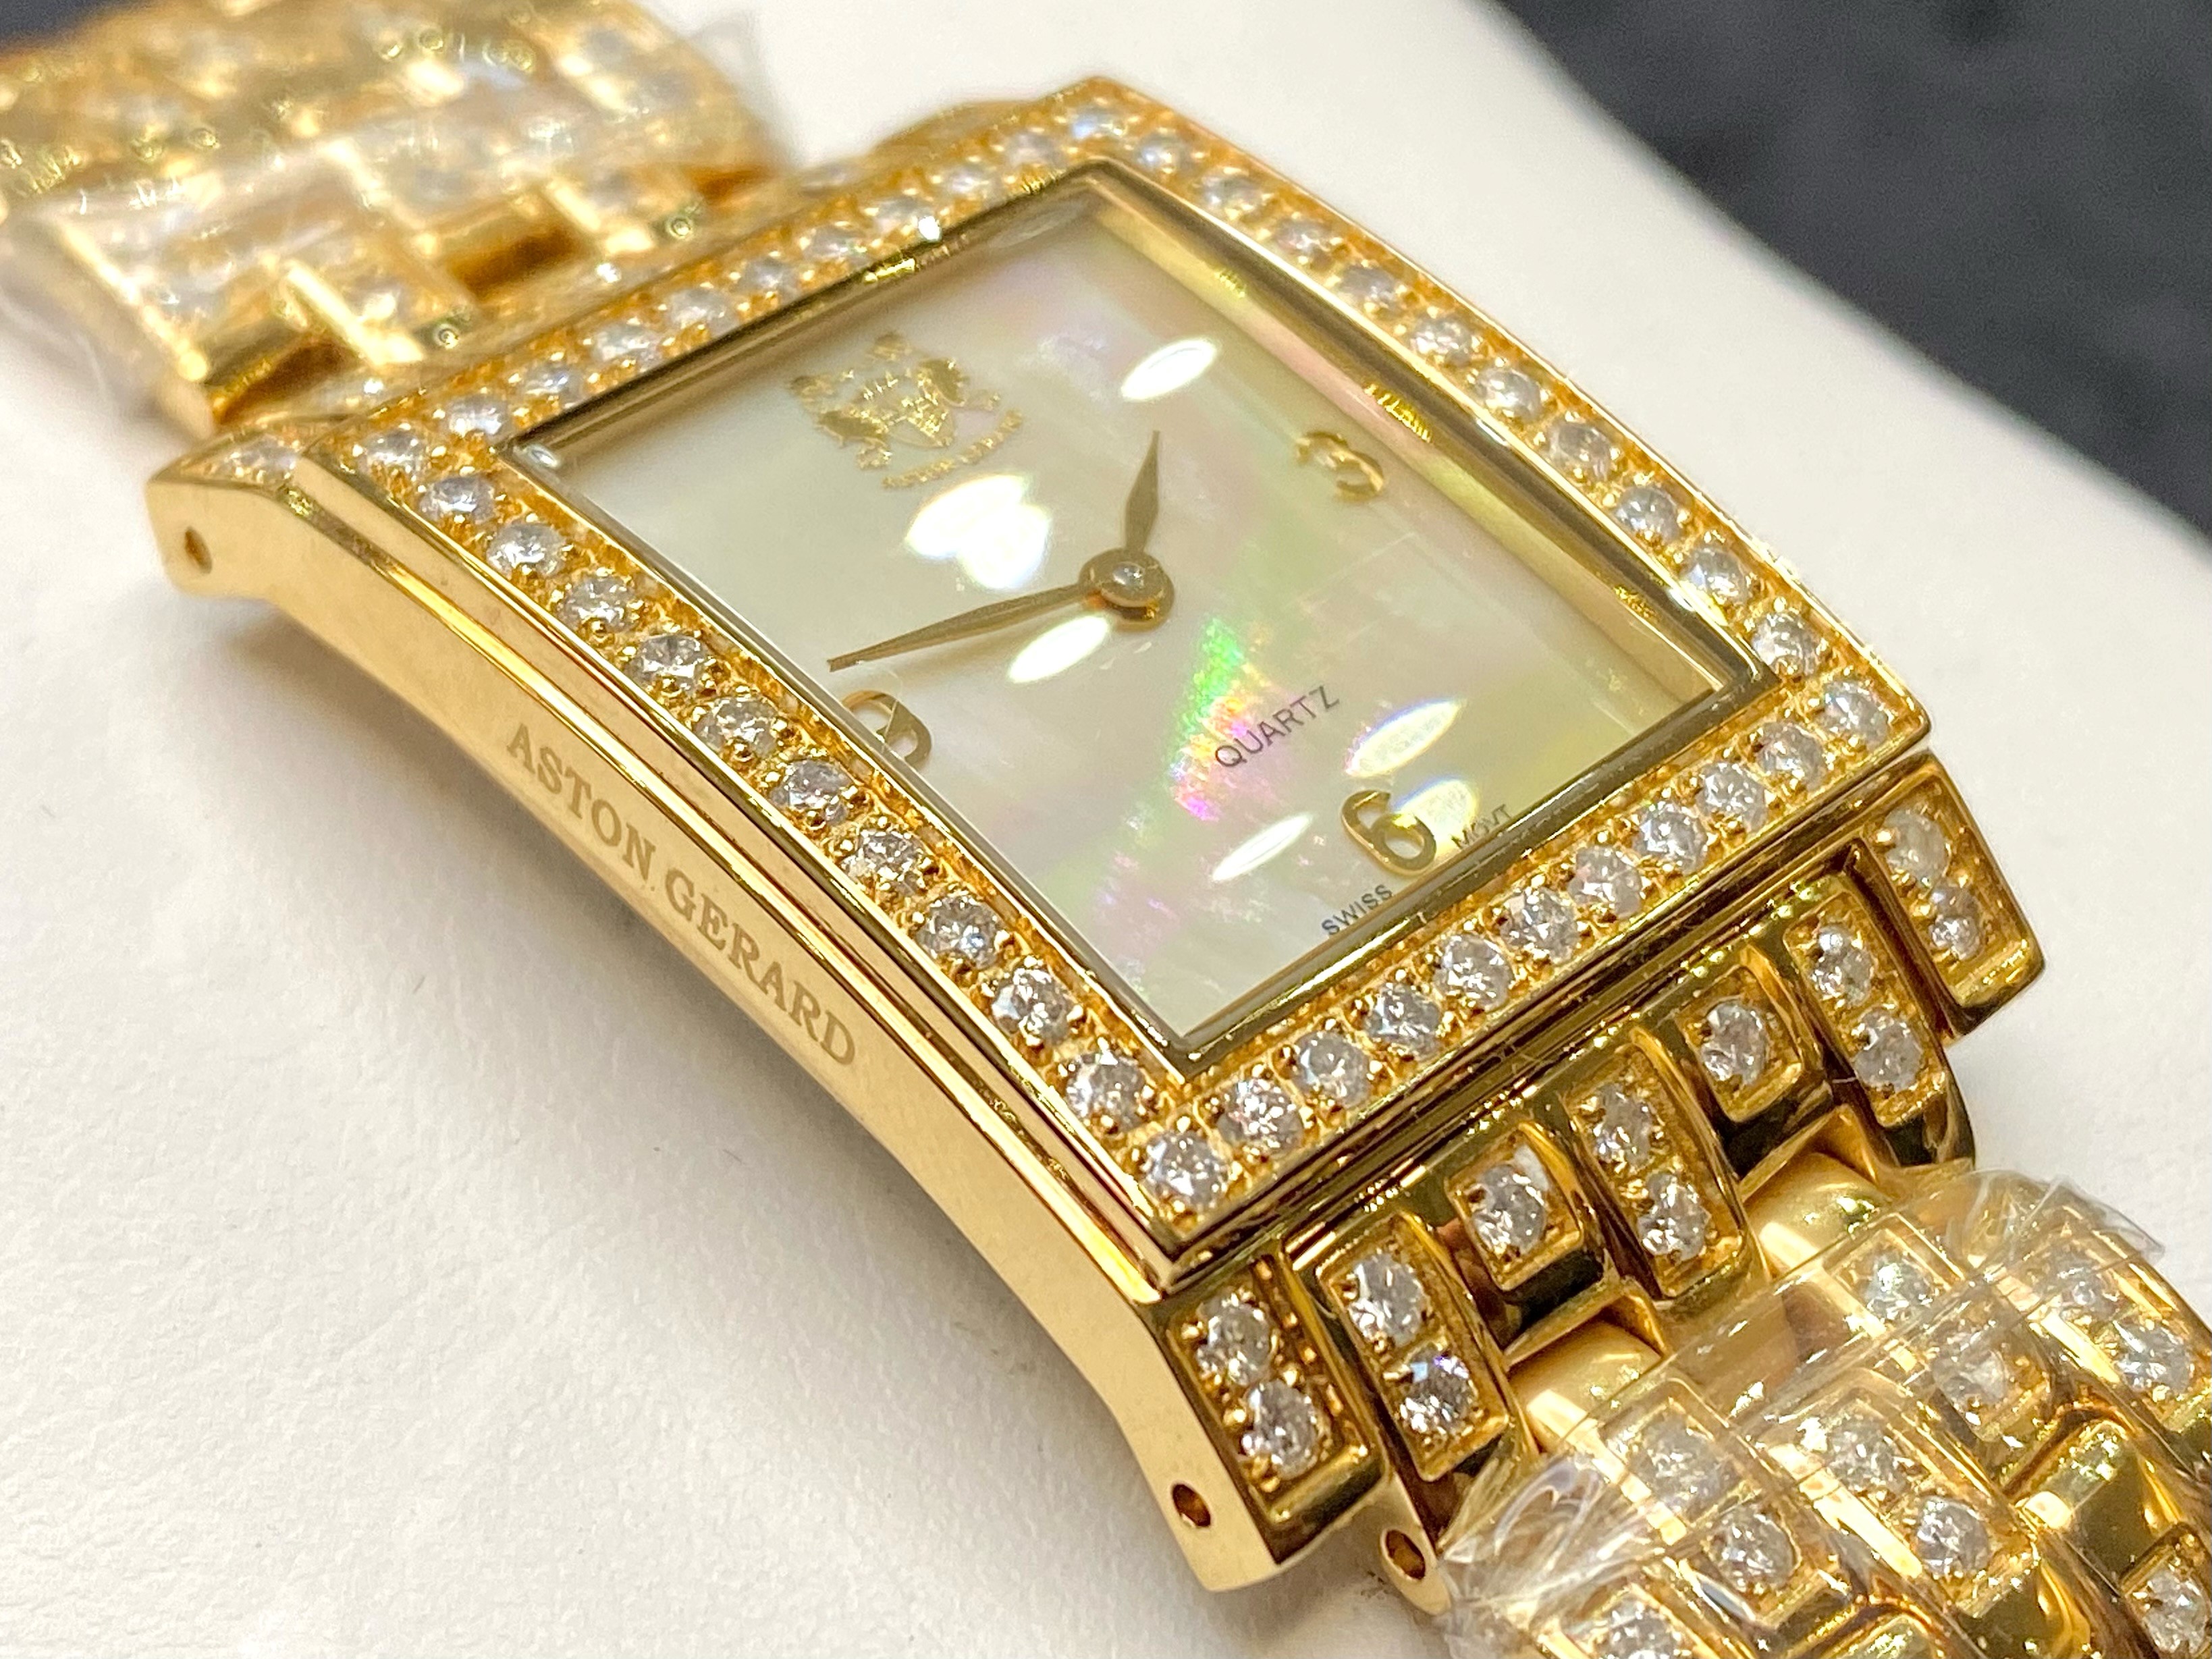 Aston Gerard Diamond Set Gold Plated Watch, set with 99 diamonds approx weight 2.12 cts. Brand new